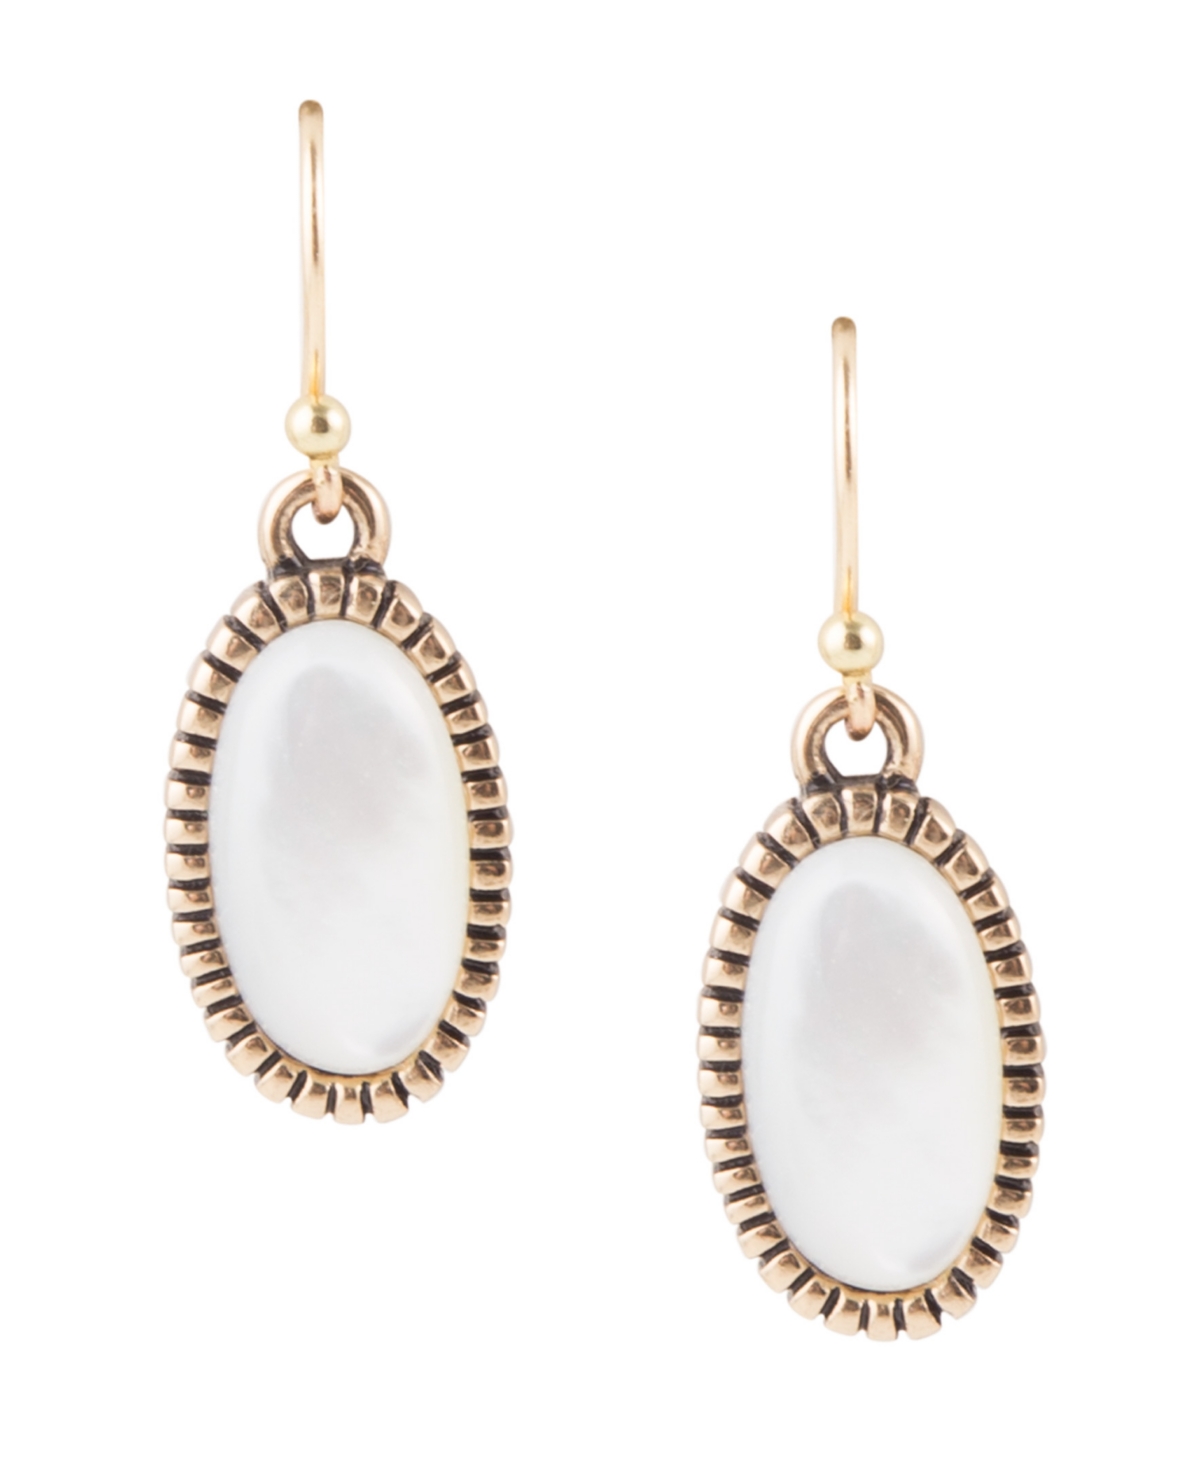 Roman Bronze and Genuine Mother-of-Pearl Drop Earrings - Mother-of-Pearl